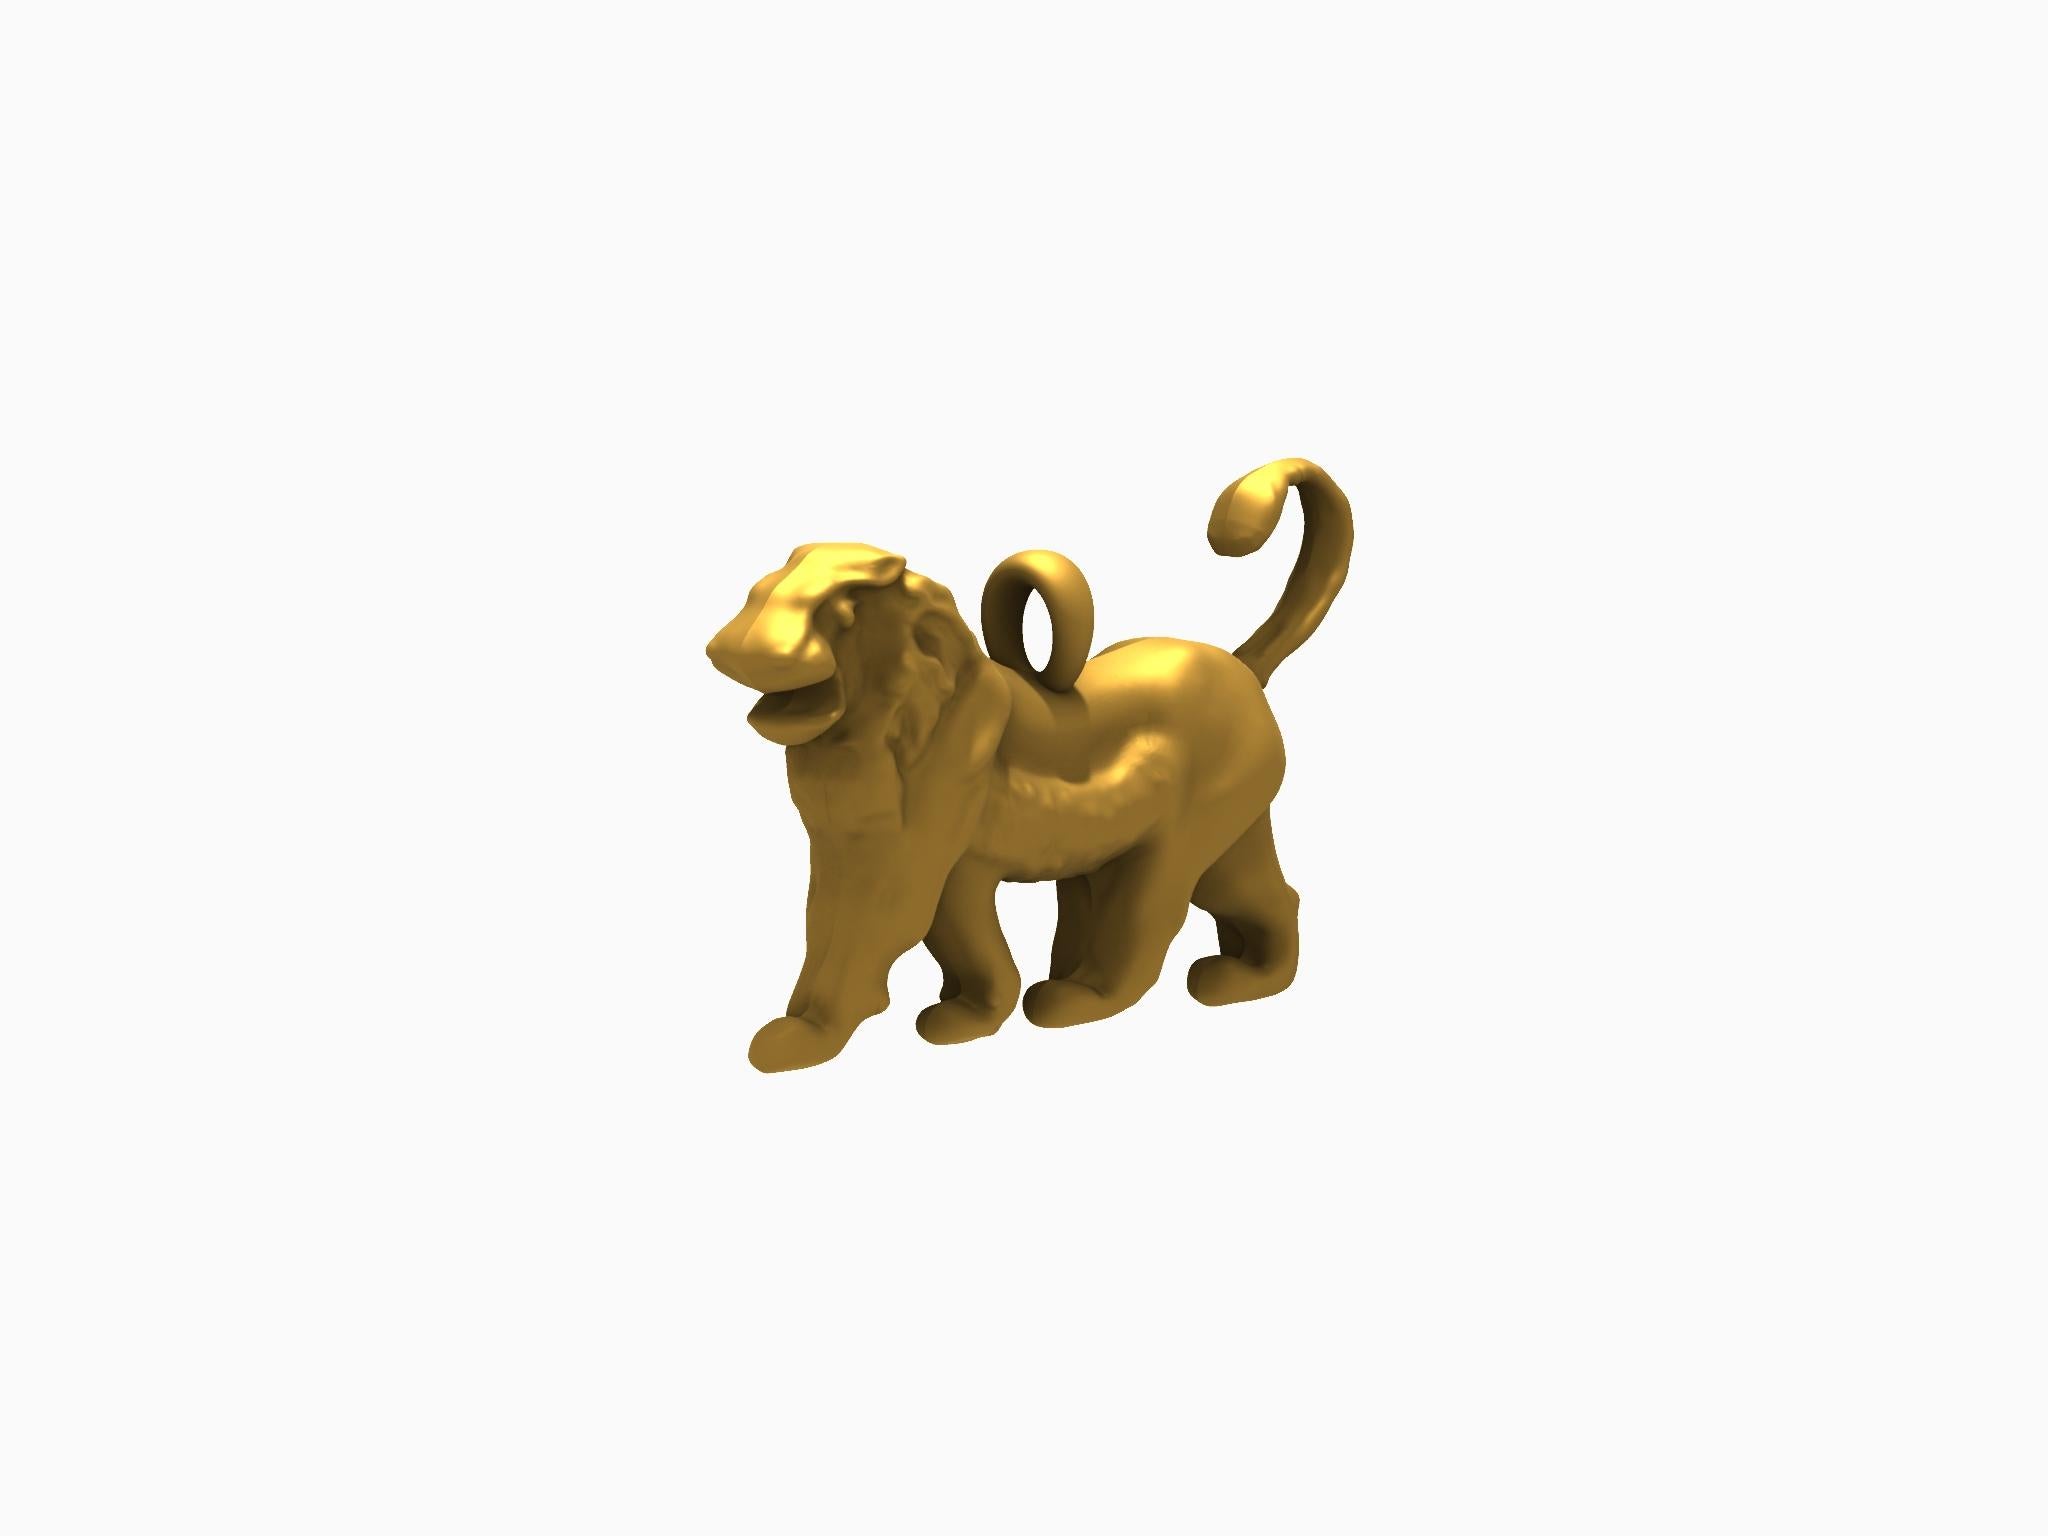 Tiffany Designer , Thomas Kurilla  created this exclusively for 1stdibs. 14 karat Yellow Gold double sided Persepolis Lion Pendant Necklace ,1 inch wide .I am a sculptor turned jewelry designer. This lion  has been the most fun in a while to sculpt.